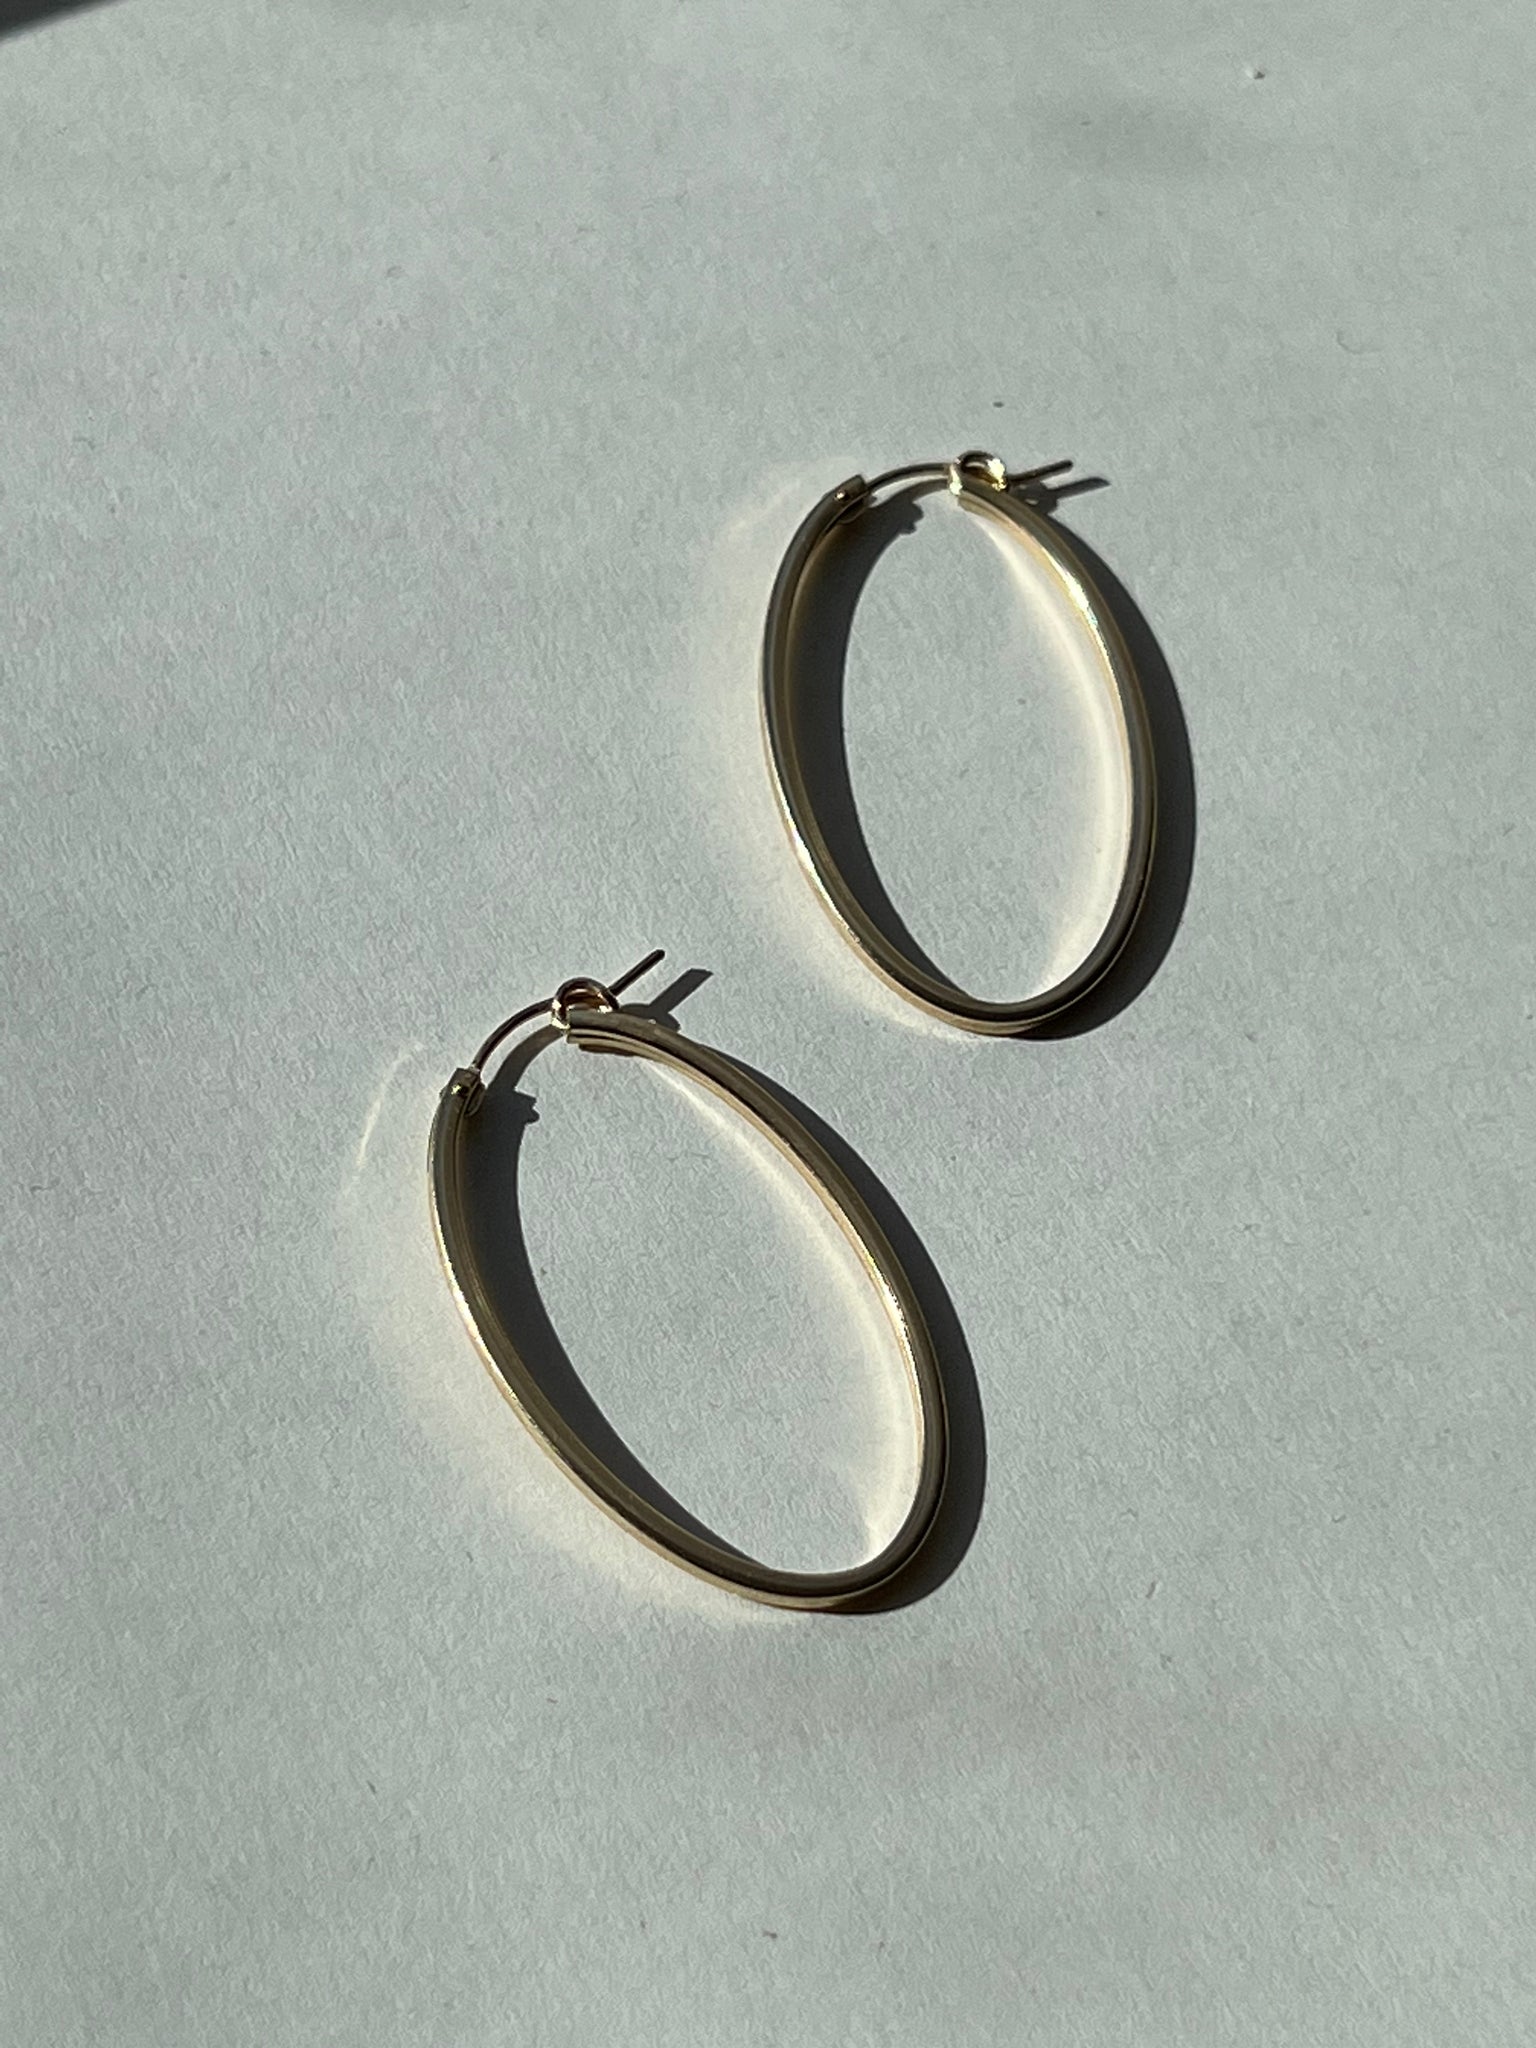 Oval Hoops- Large